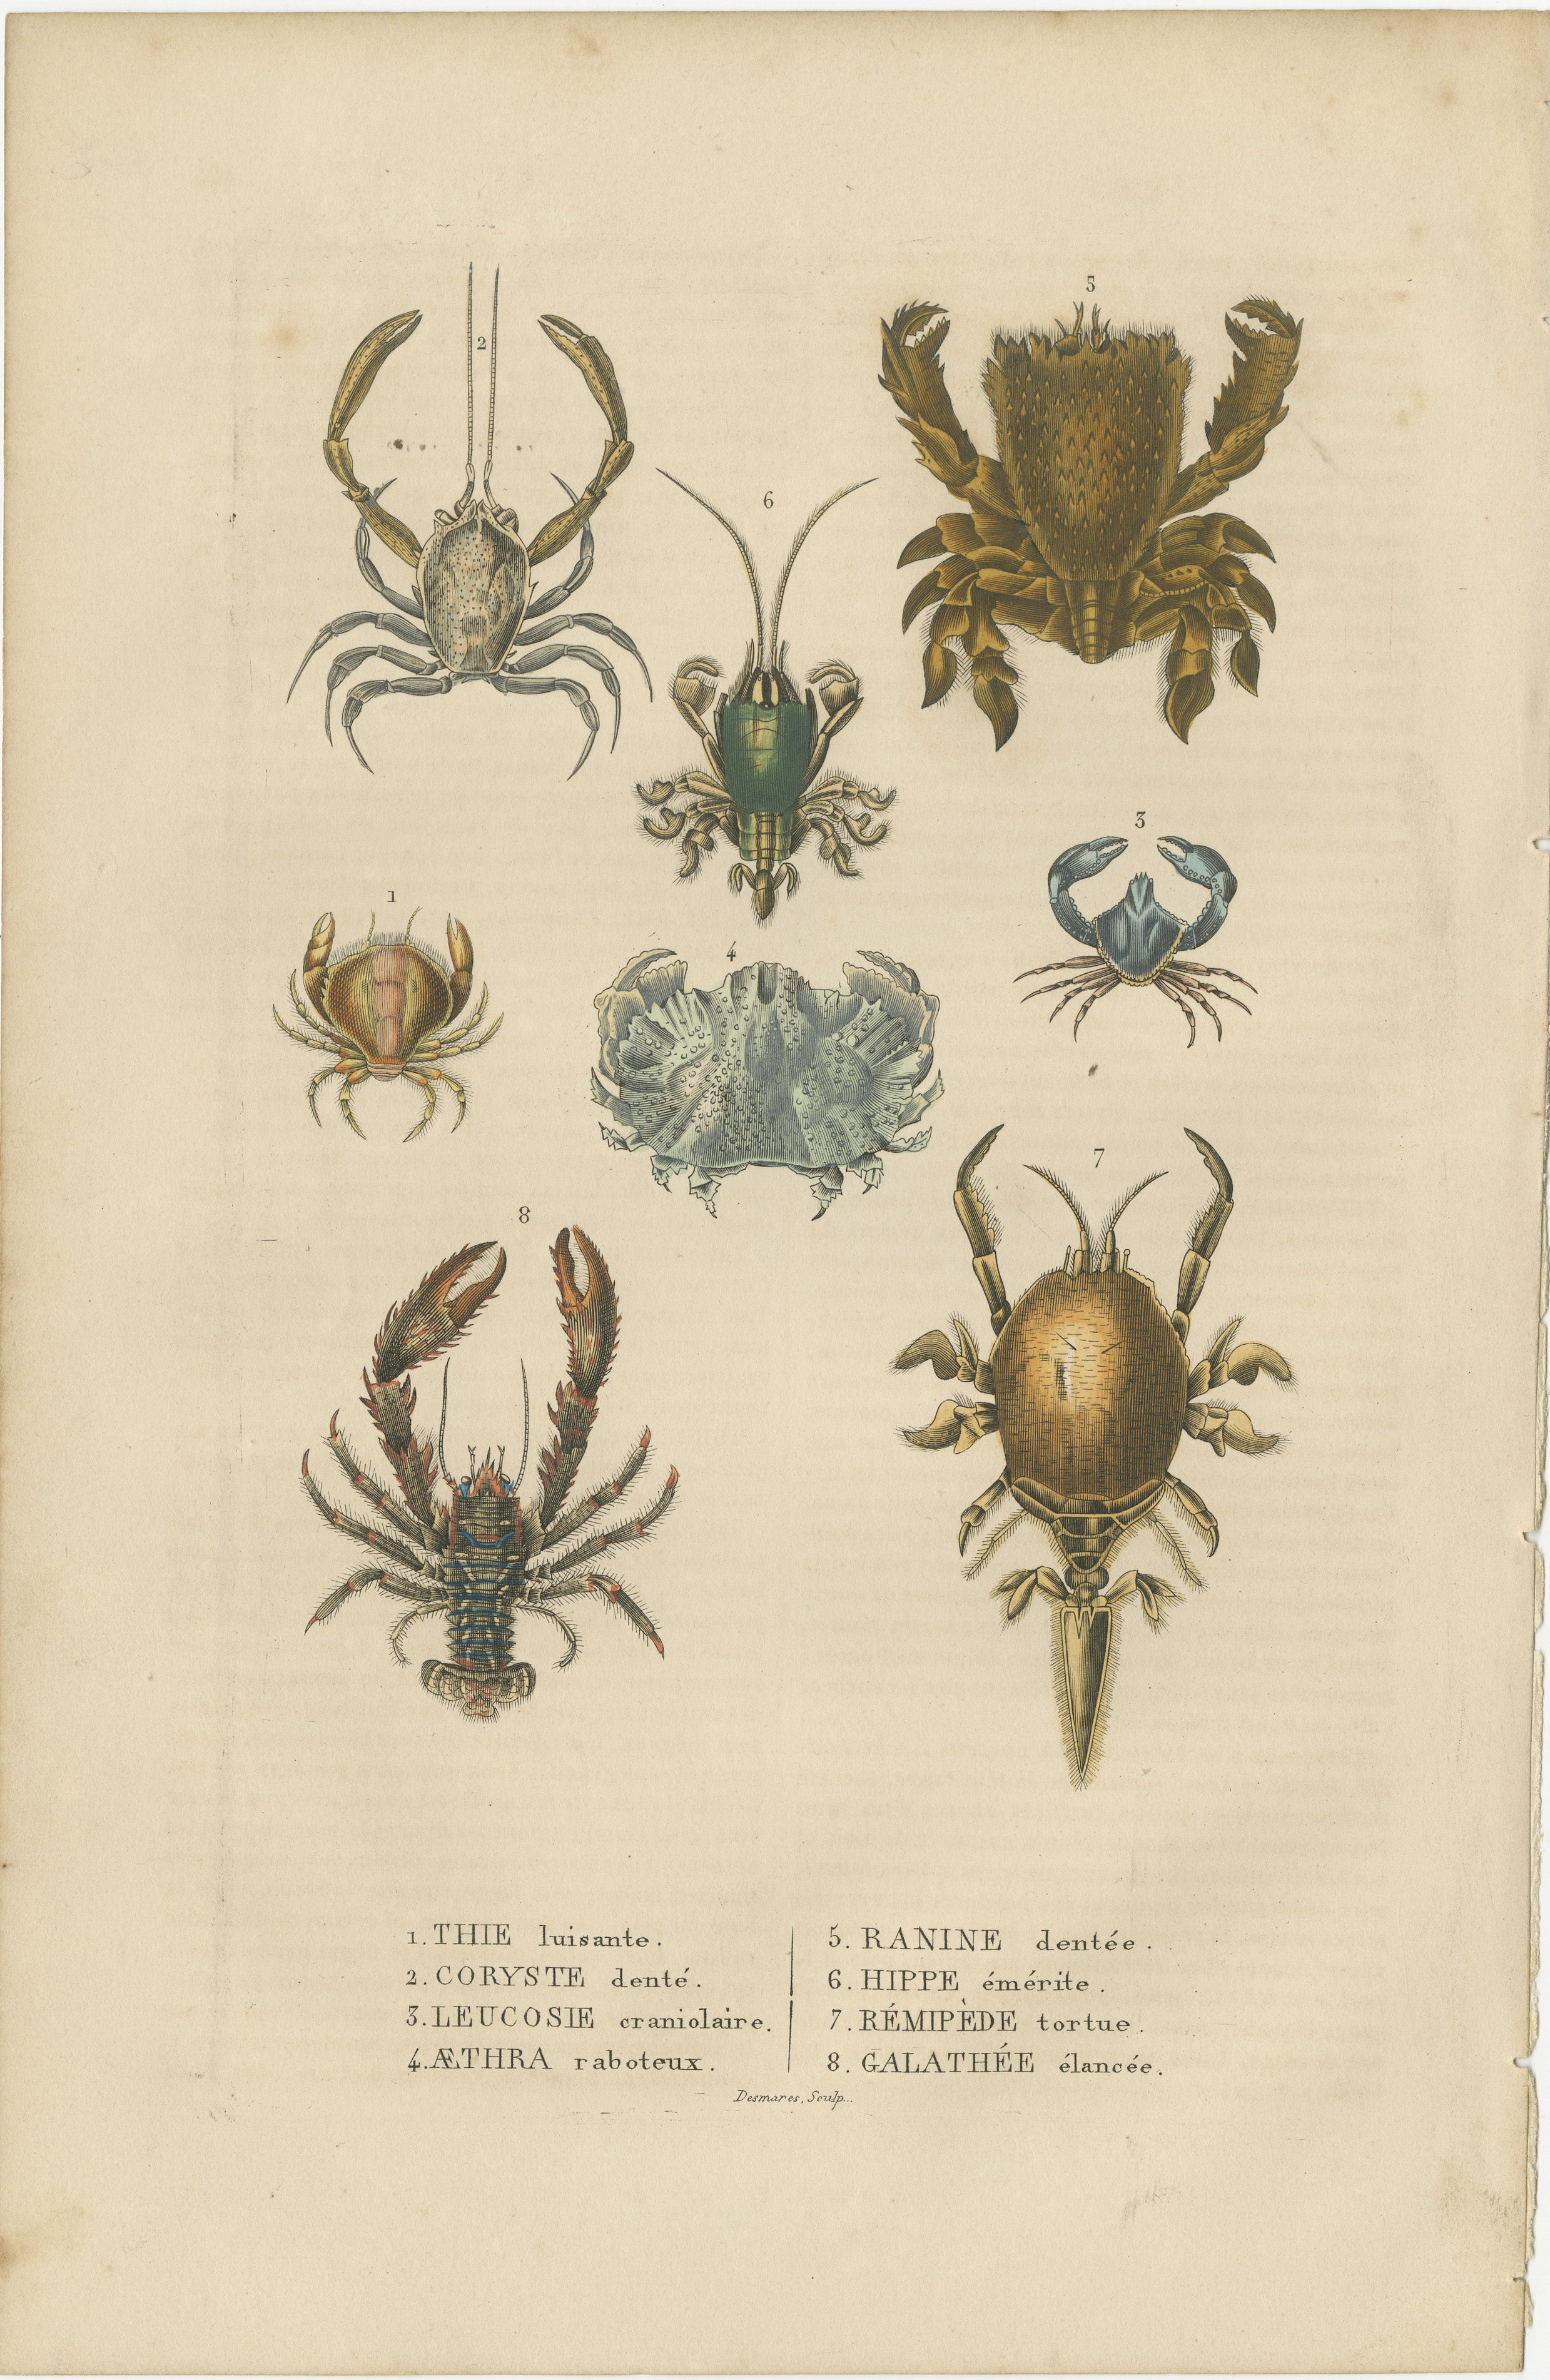 This original hand-colored antique engraving appears to depict a variety of crustaceans, which are characterized by their hard exoskeletons, segmented bodies, and jointed limbs. Each of the numbered creatures is labeled in French with common names